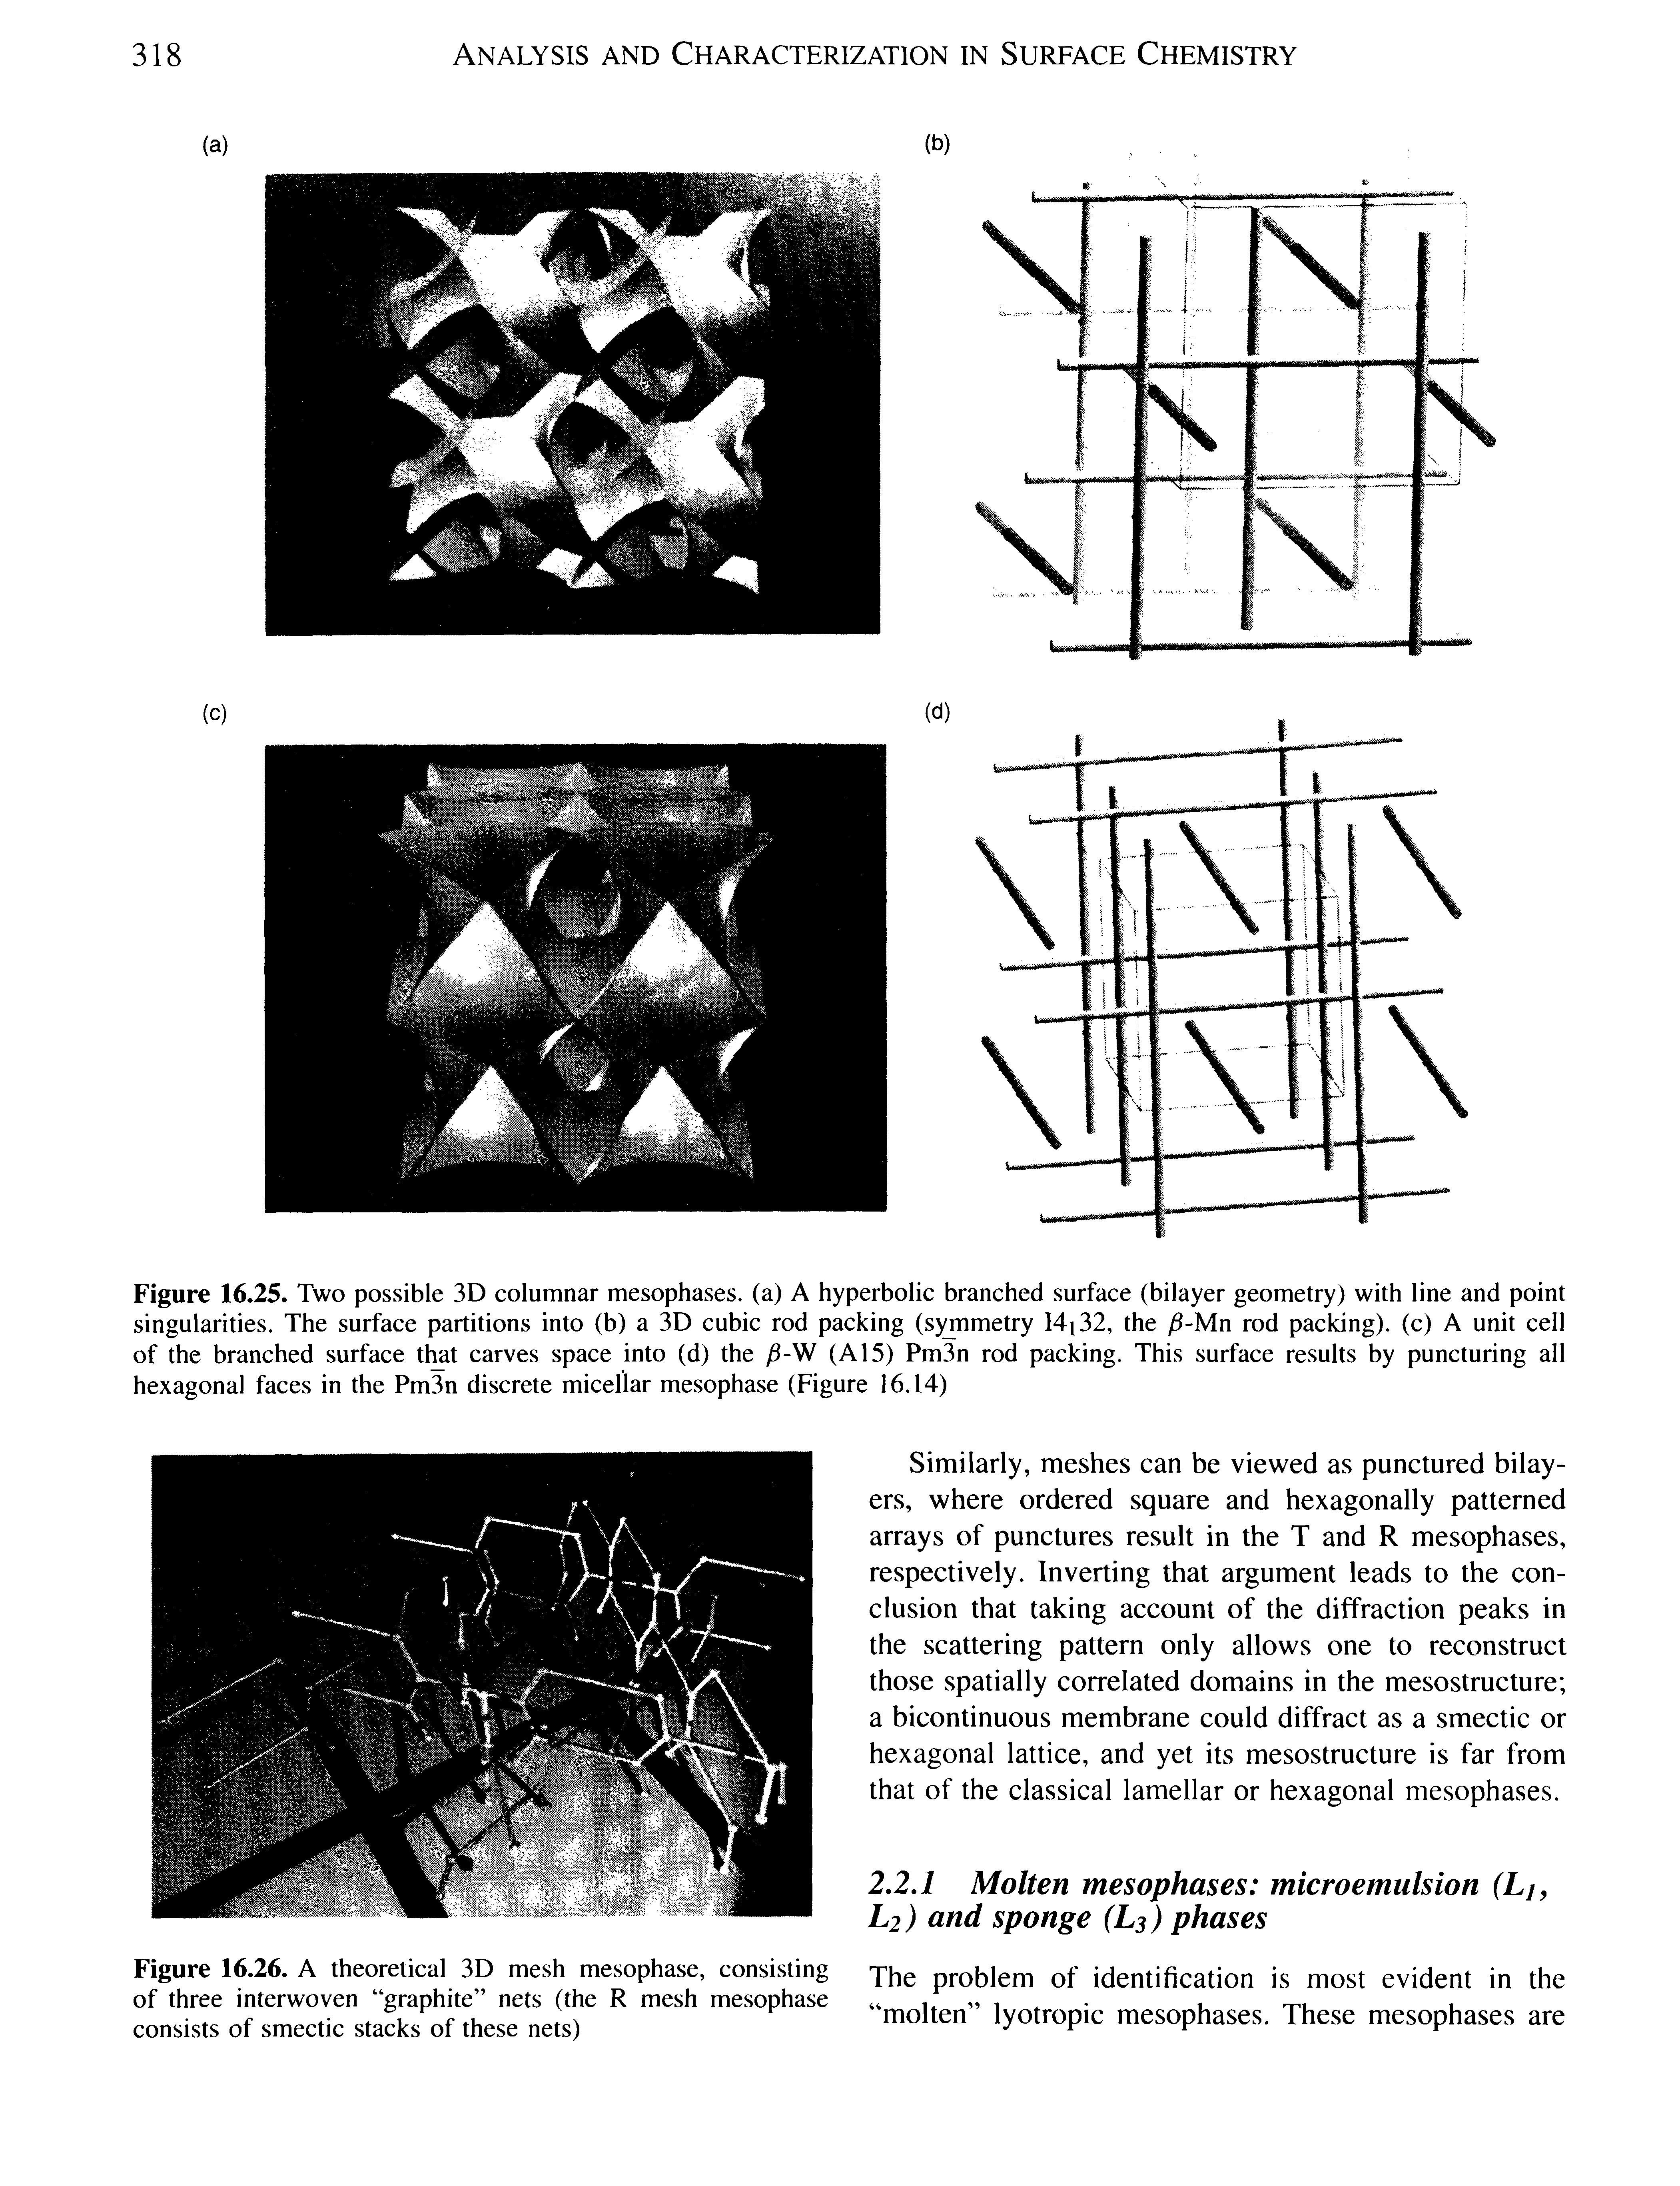 Figure 16.26. A theoretical 3D mesh mesophase, consisting of three interwoven graphite nets (the R mesh mesophase consists of smectic stacks of these nets)...